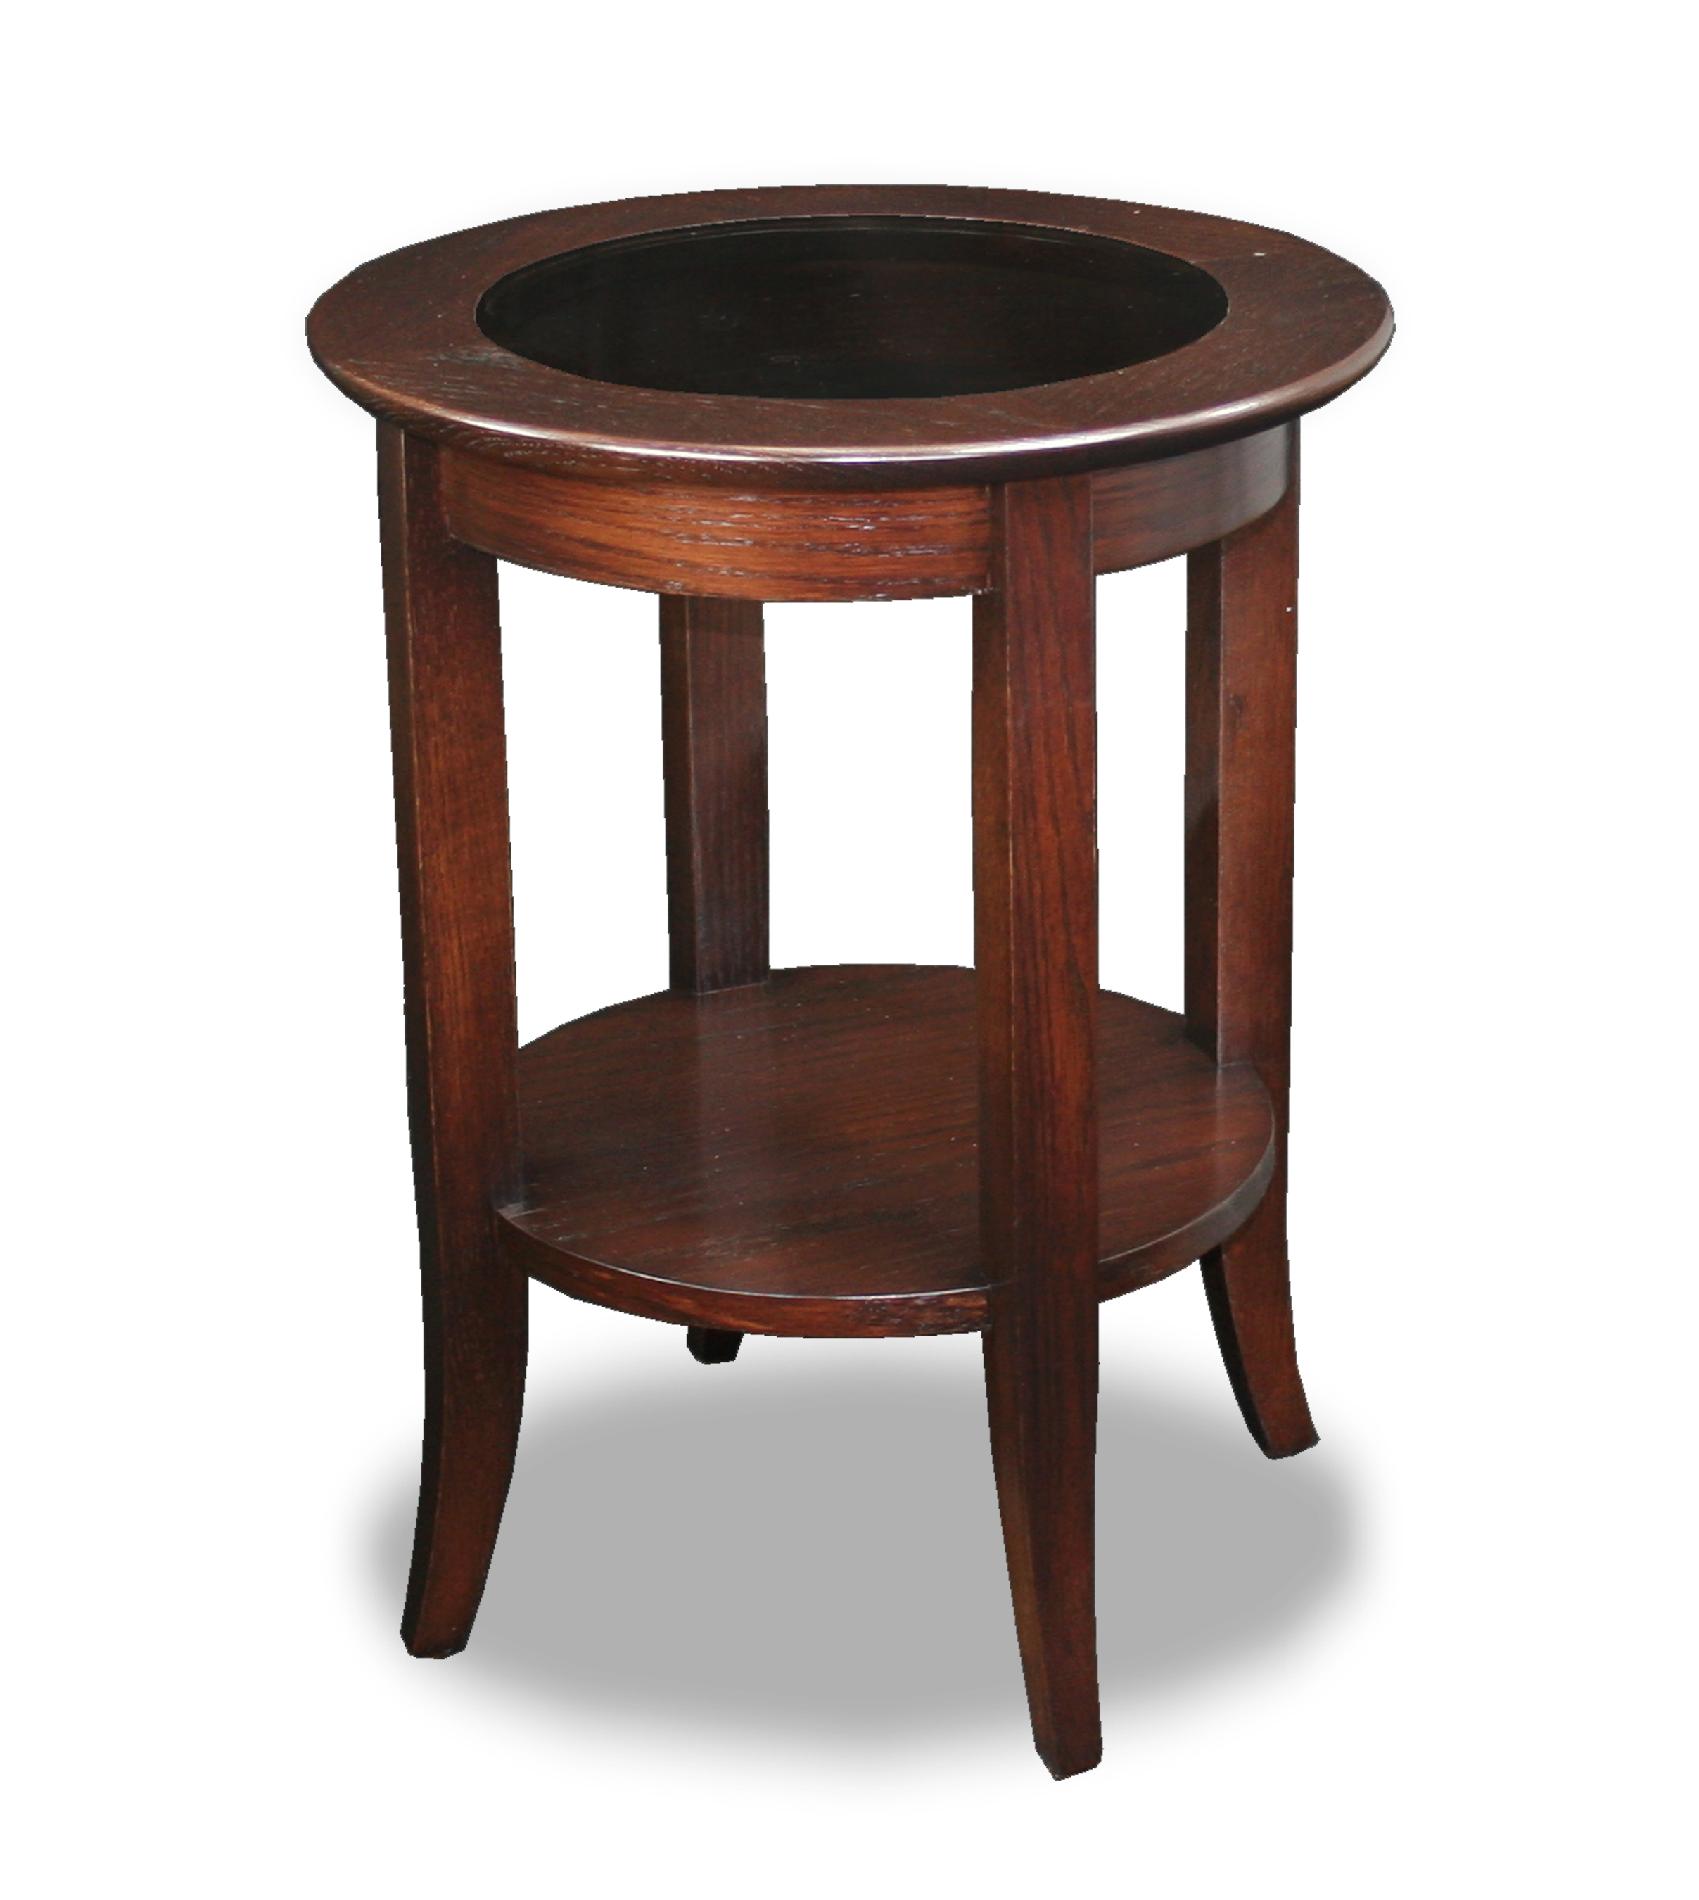 Leick Solid Wood Round Glass Top End Table - Chocolate Oak Finish